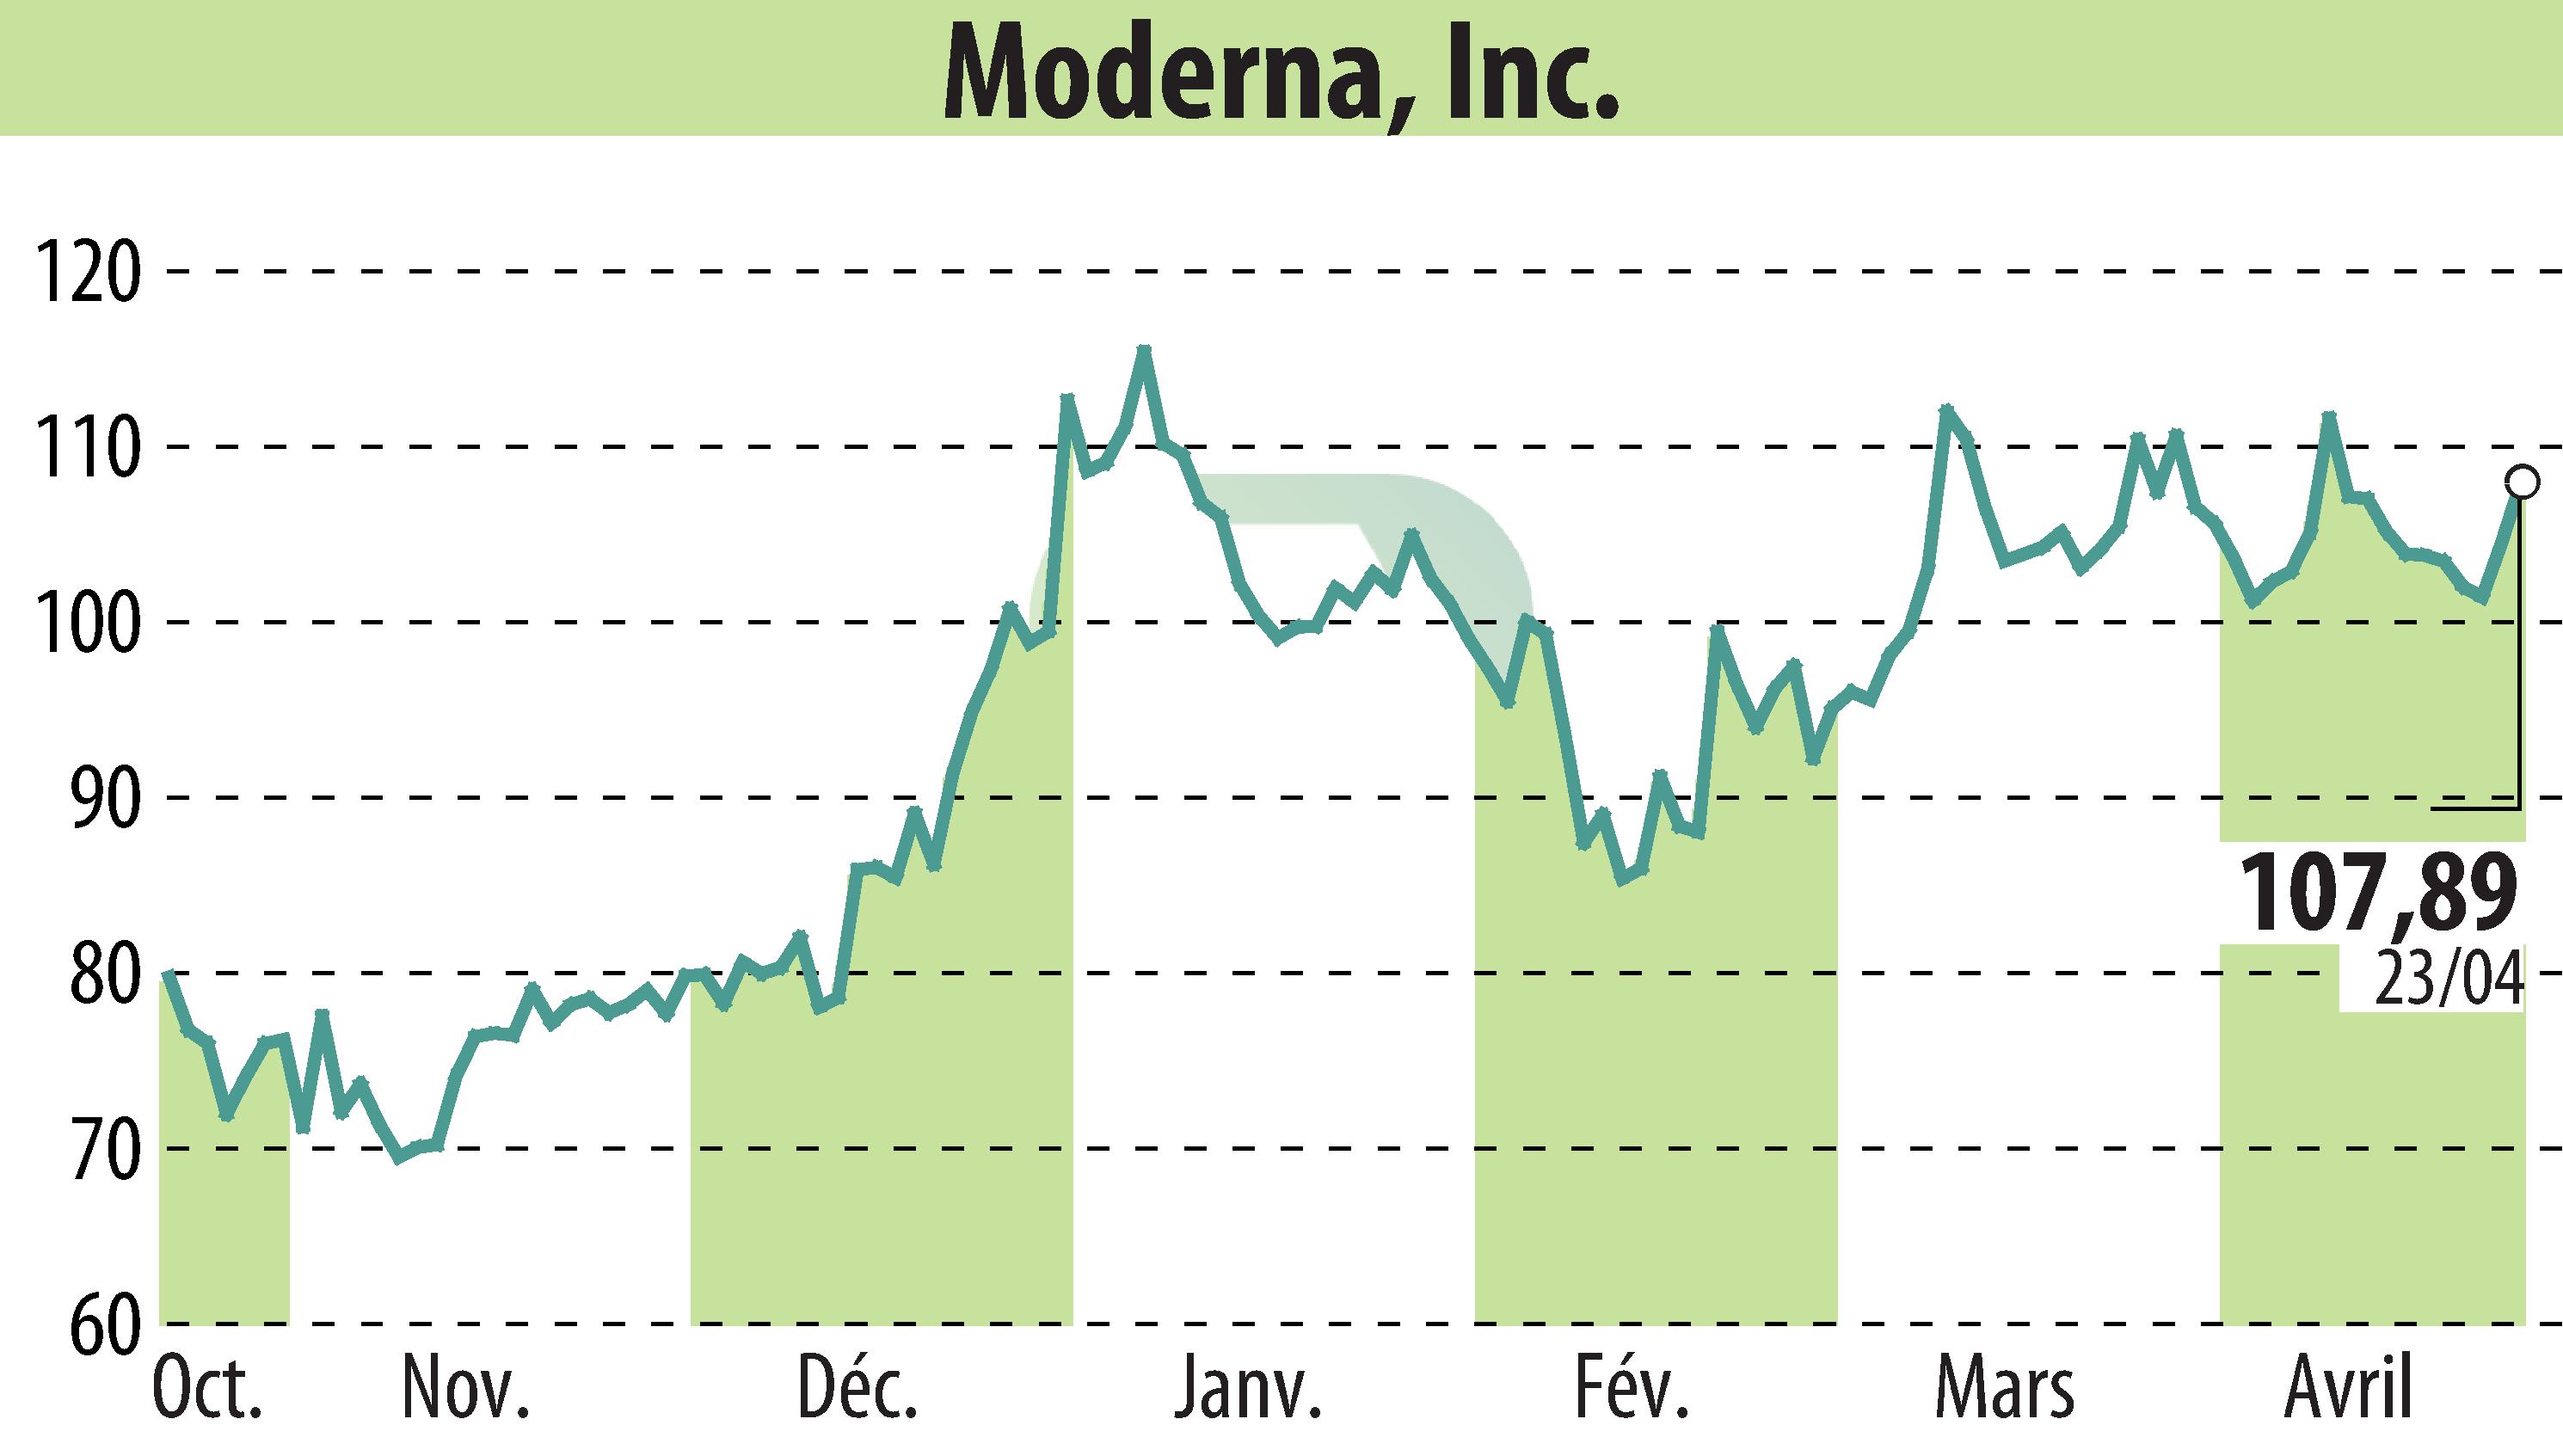 Stock price chart of Moderna, Inc. (EBR:MRNA) showing fluctuations.